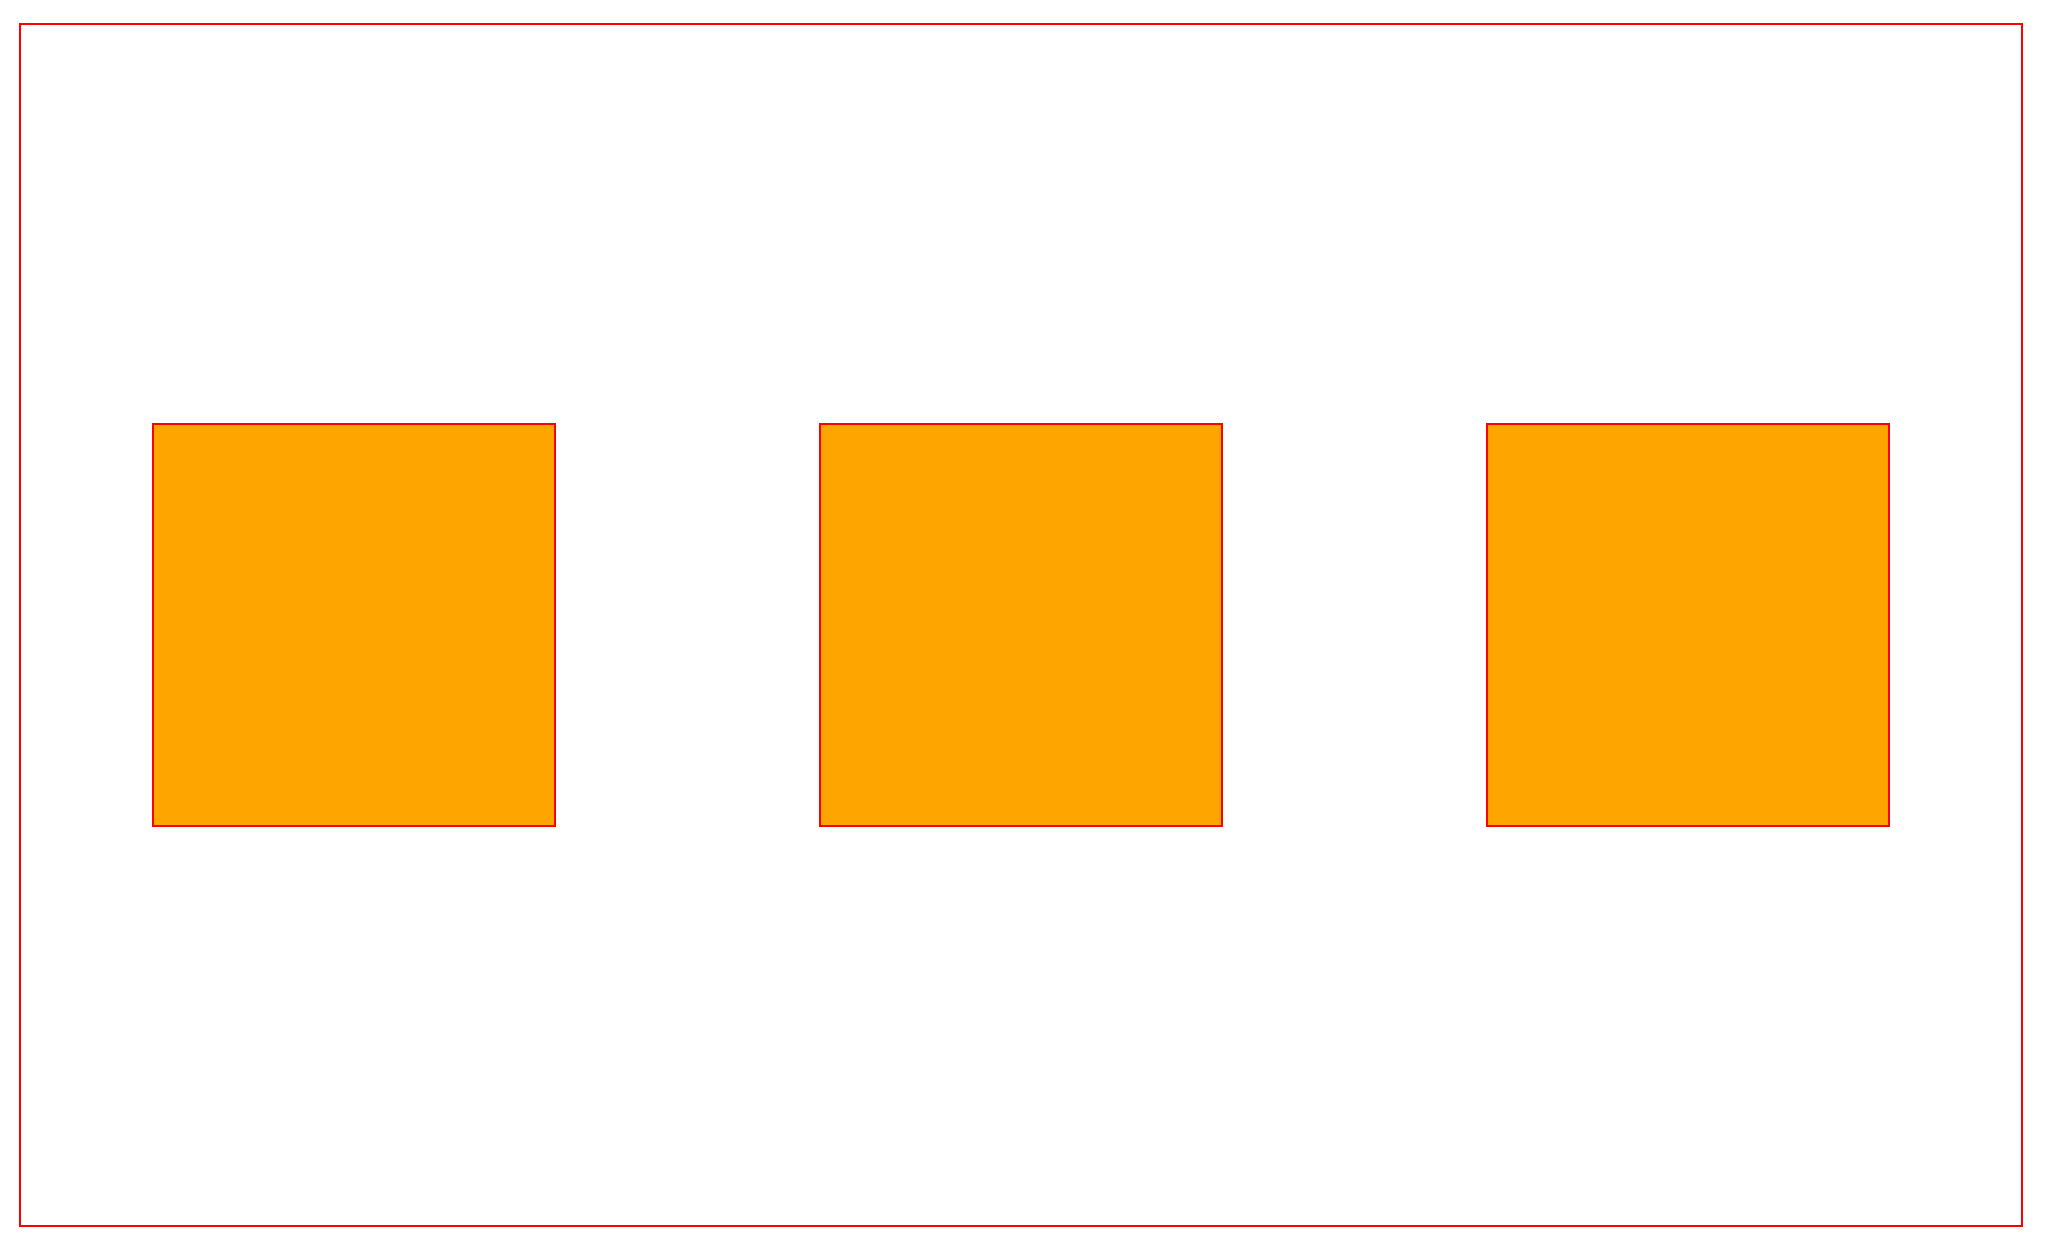 Three orange boxes in a row evenly spaced apart, with the row vertically centered in the outer wrapper